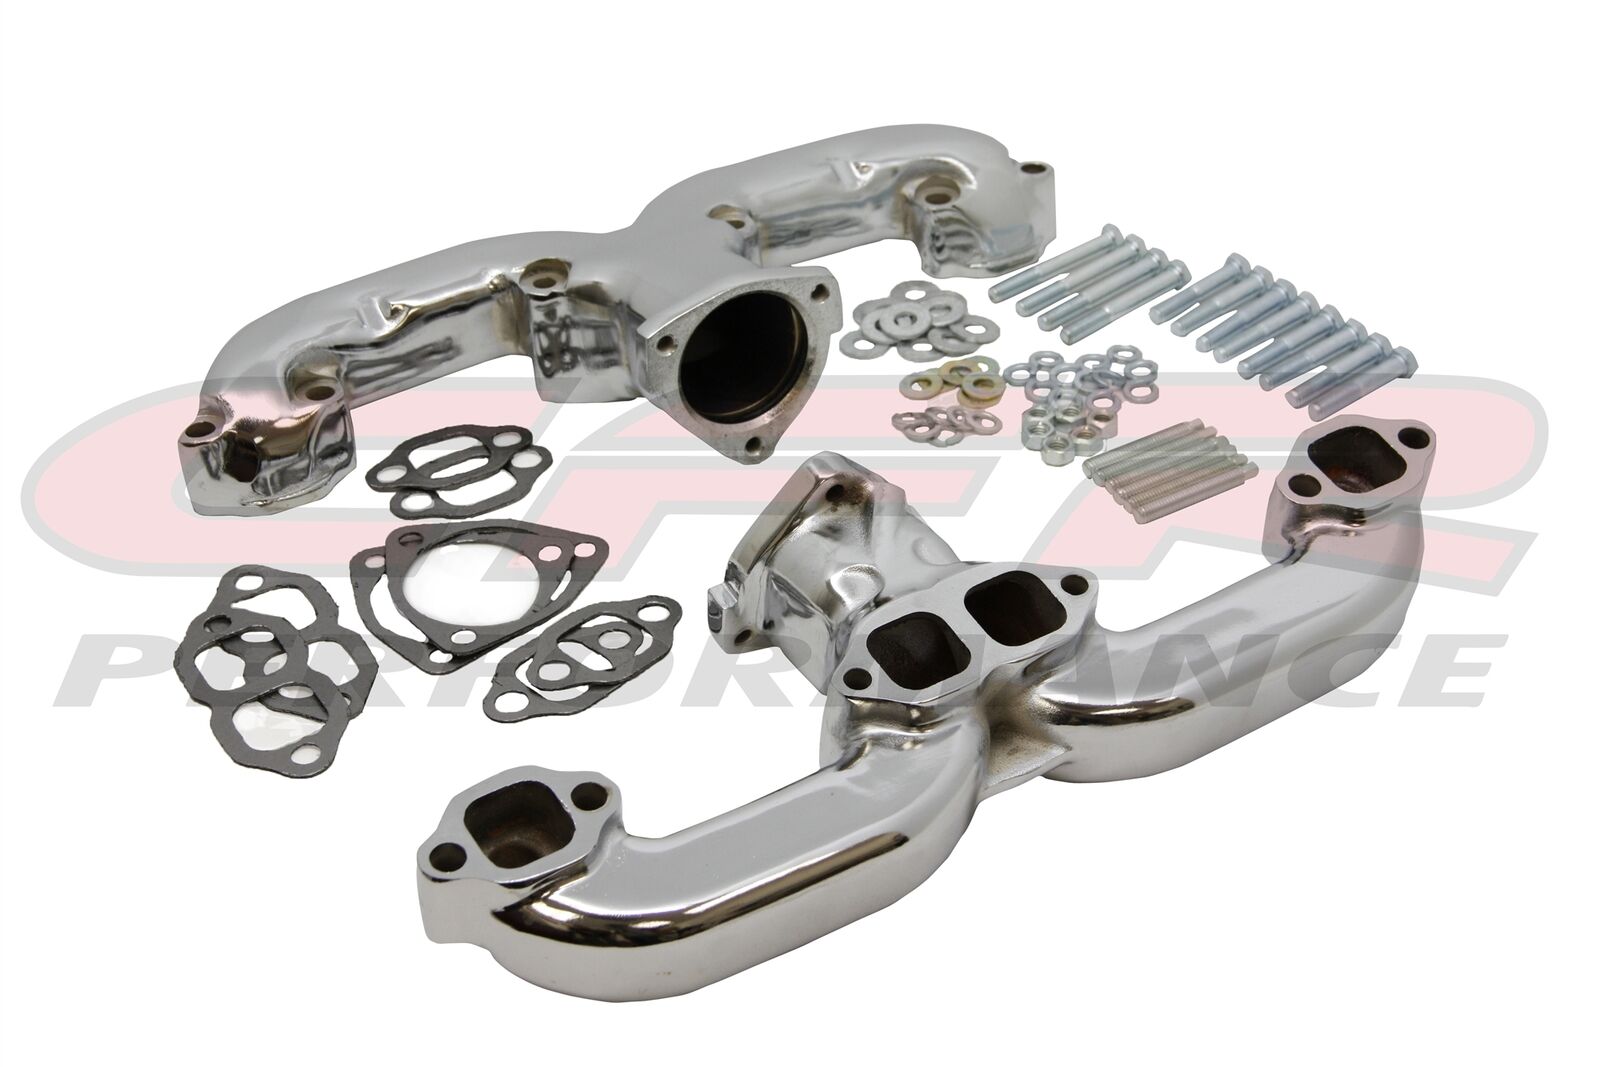 Blemish Cast Iron 1955-up Chevy SmallBlock Rams Horn Exhaust Manifolds - CHROME 